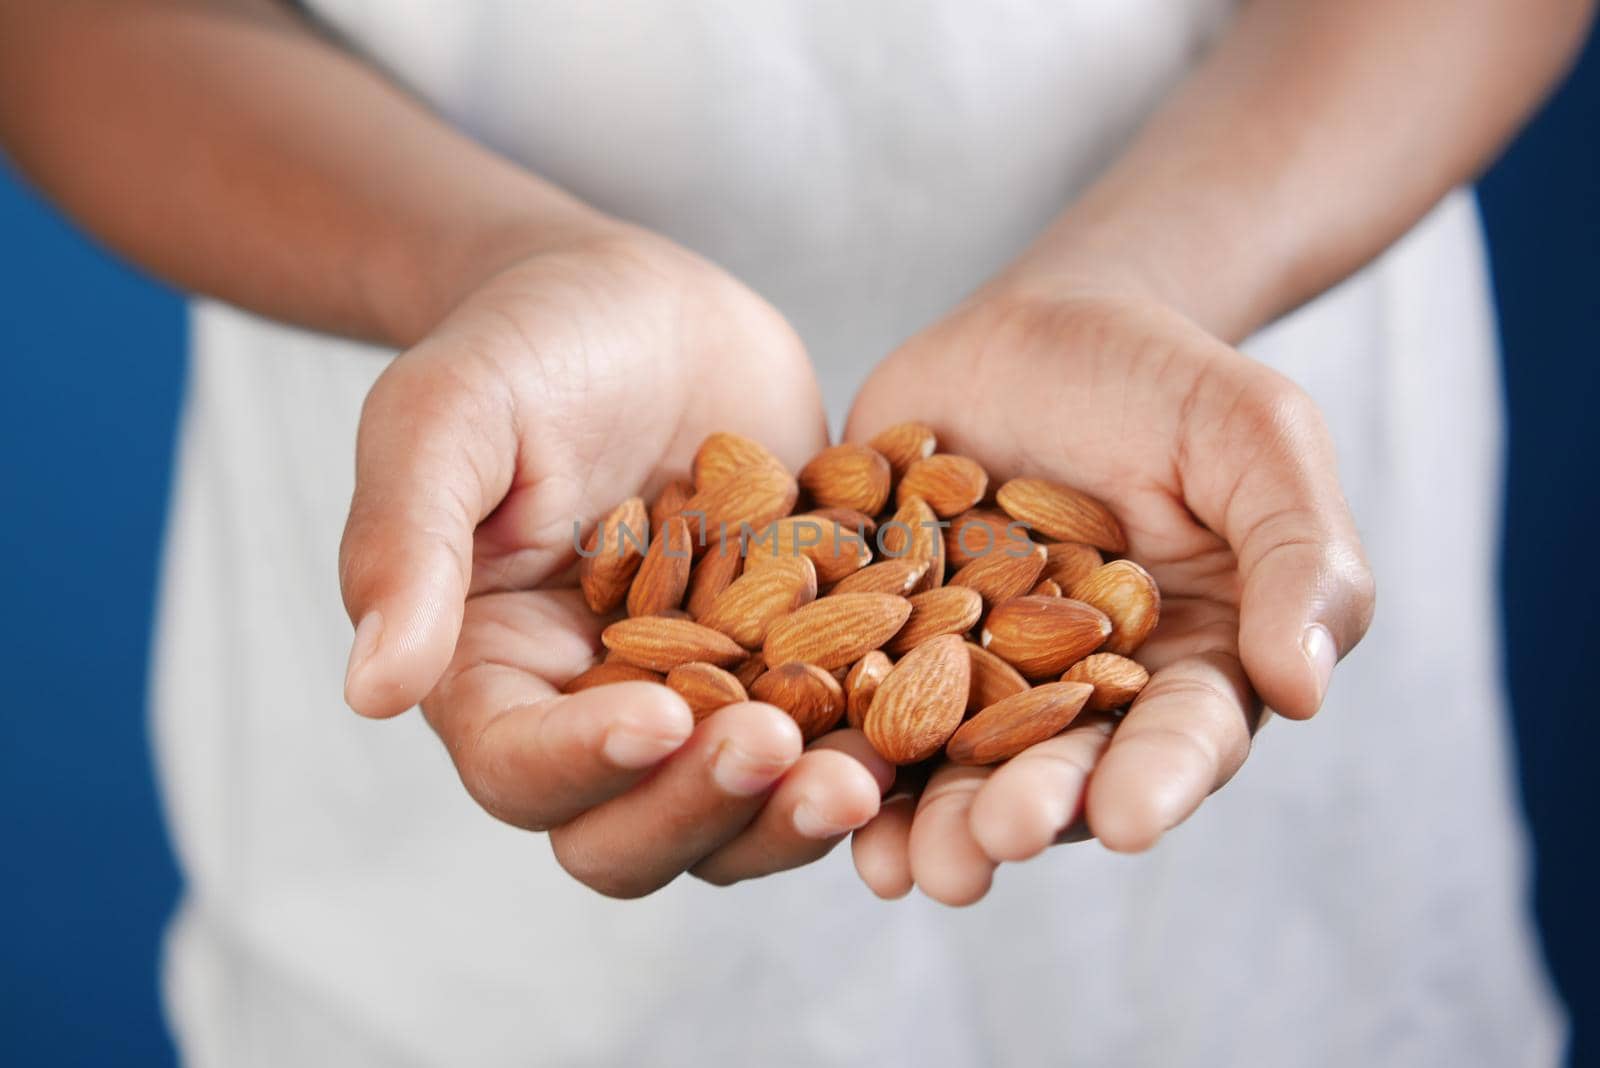 close up of almond nuts on man's hand .